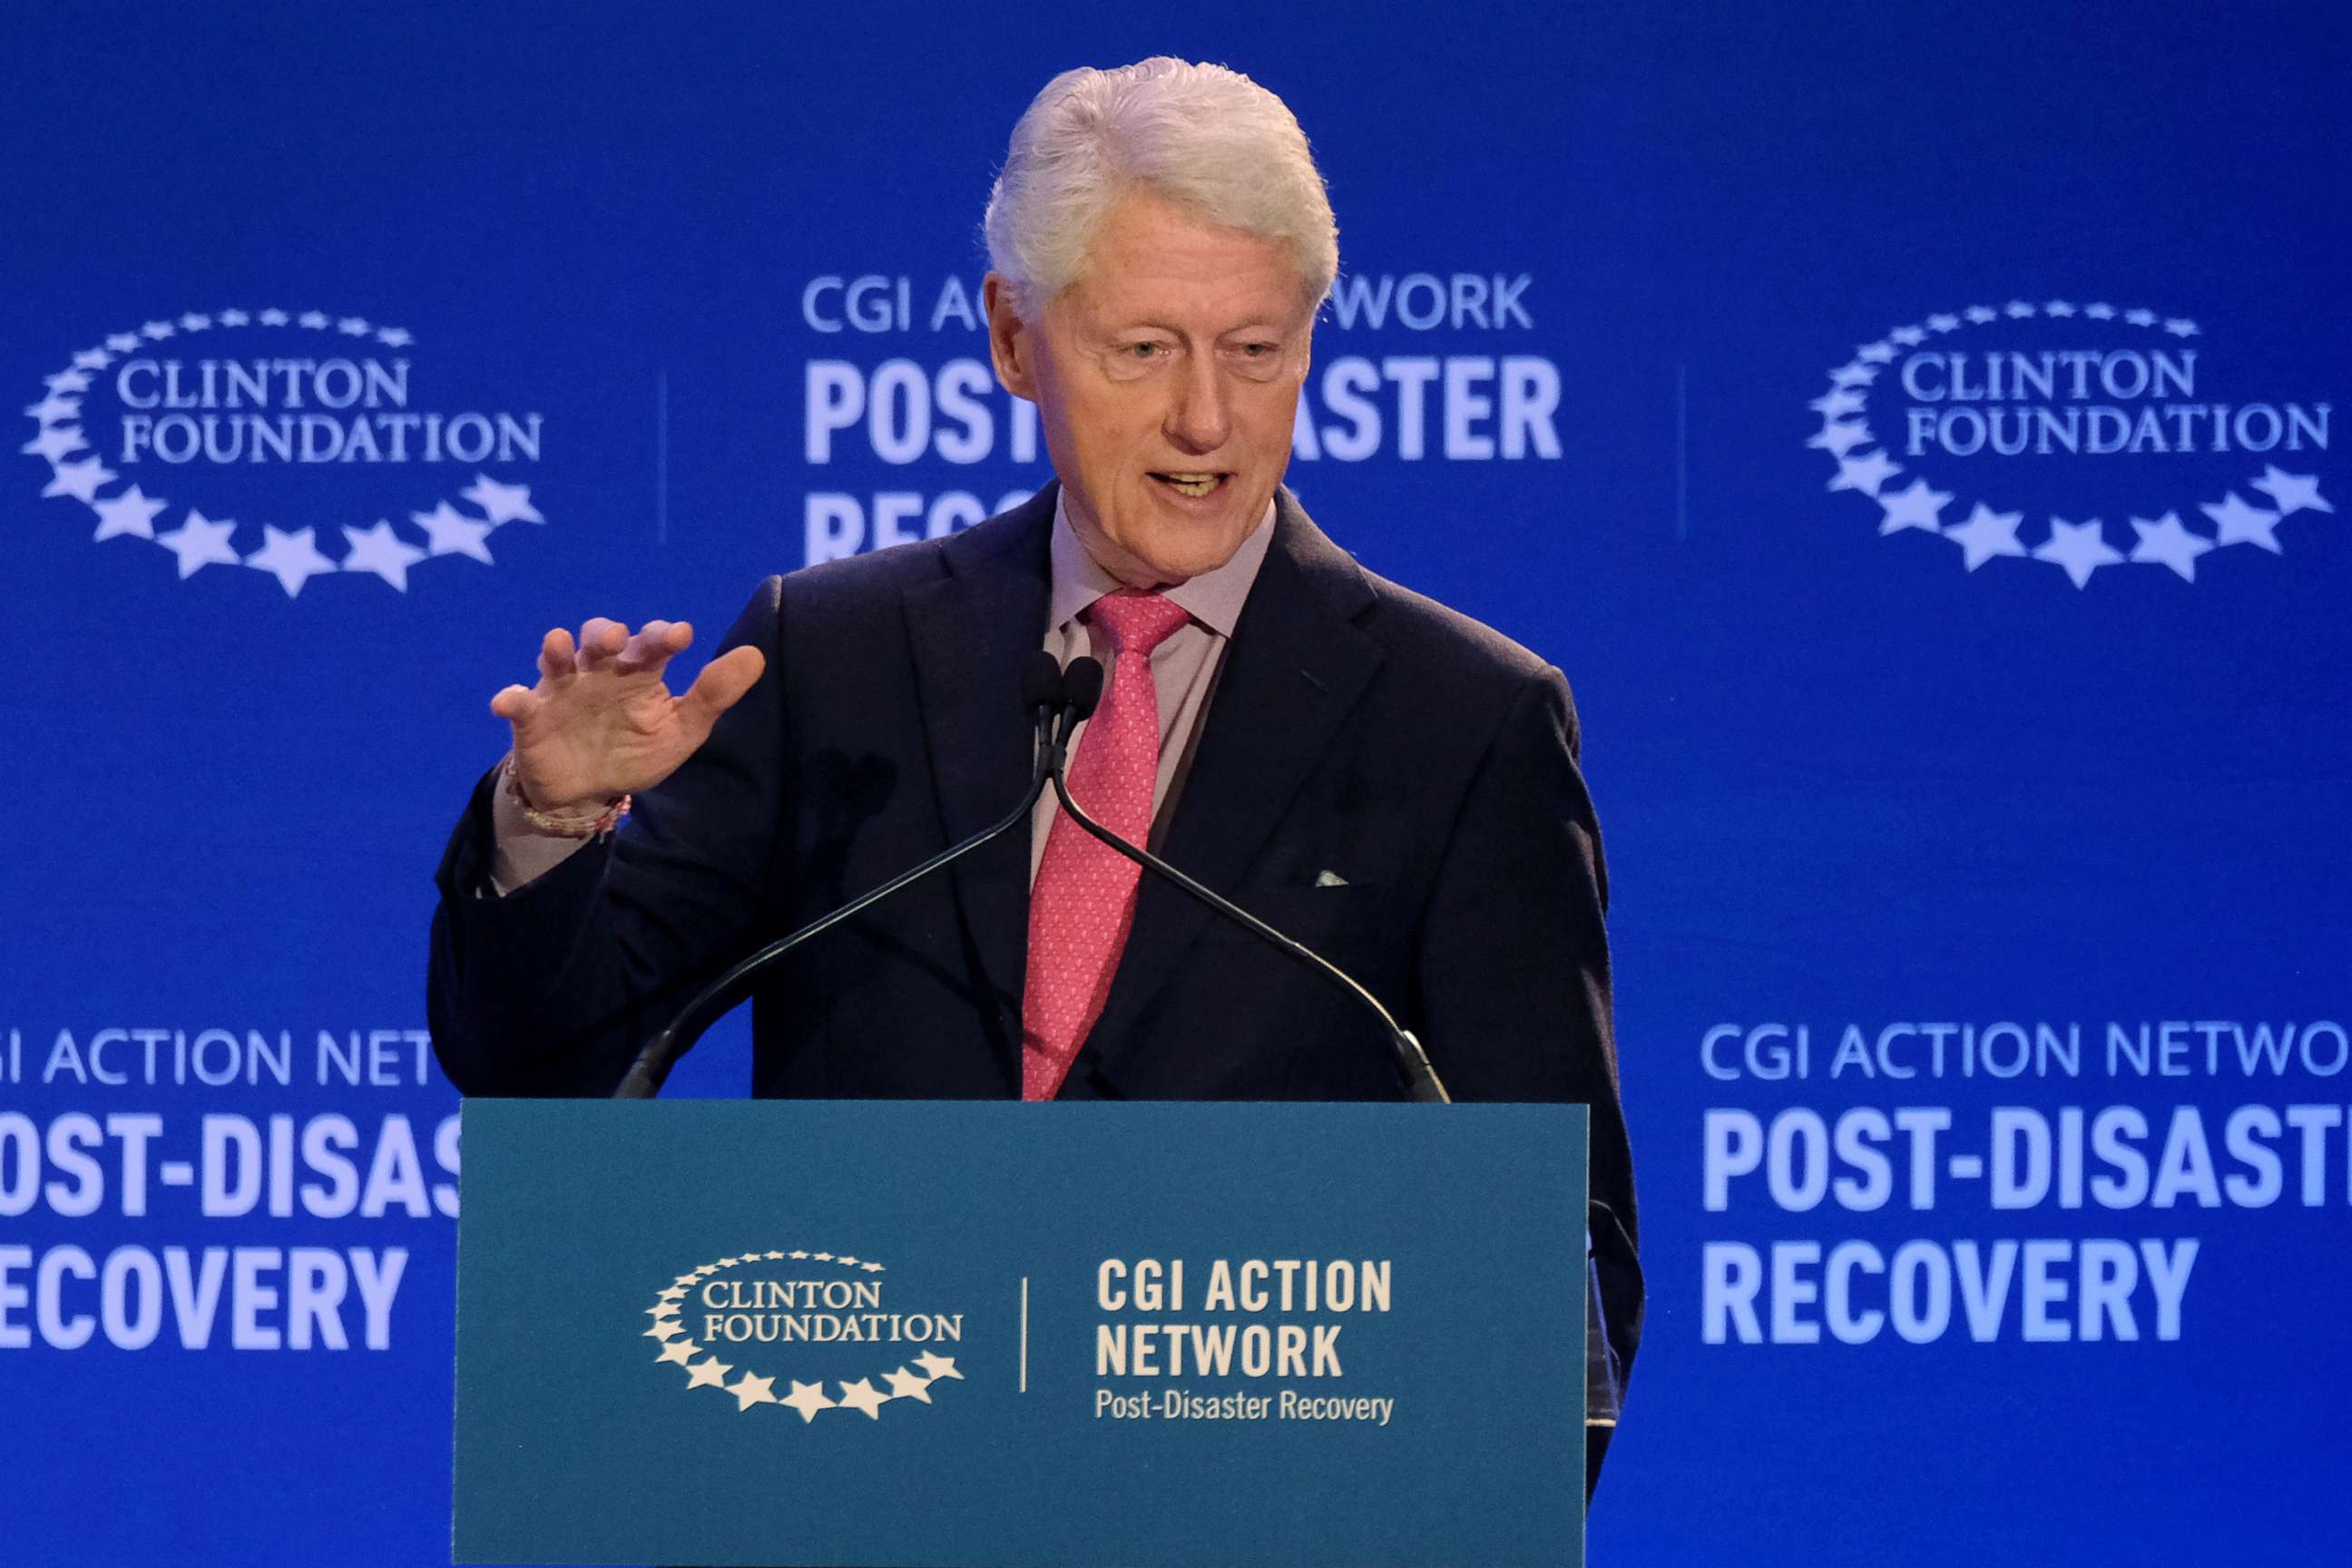 PHOTO: Former President Bill Clinton attends a meeting of the Clinton Global Initiative (CGI) Action Network in San Juan, Puerto Rico, Feb. 18, 2020.